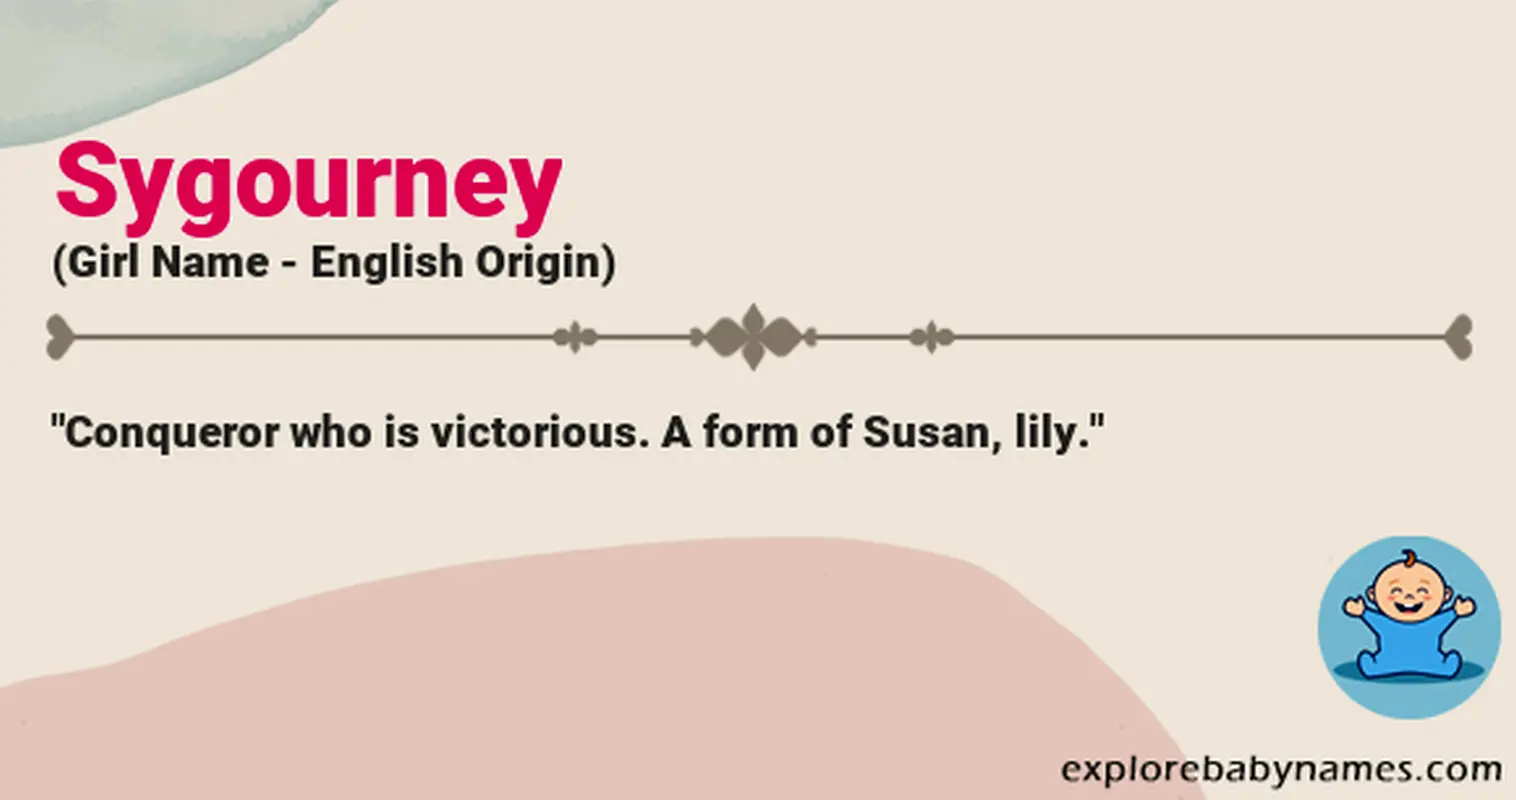 Meaning of Sygourney